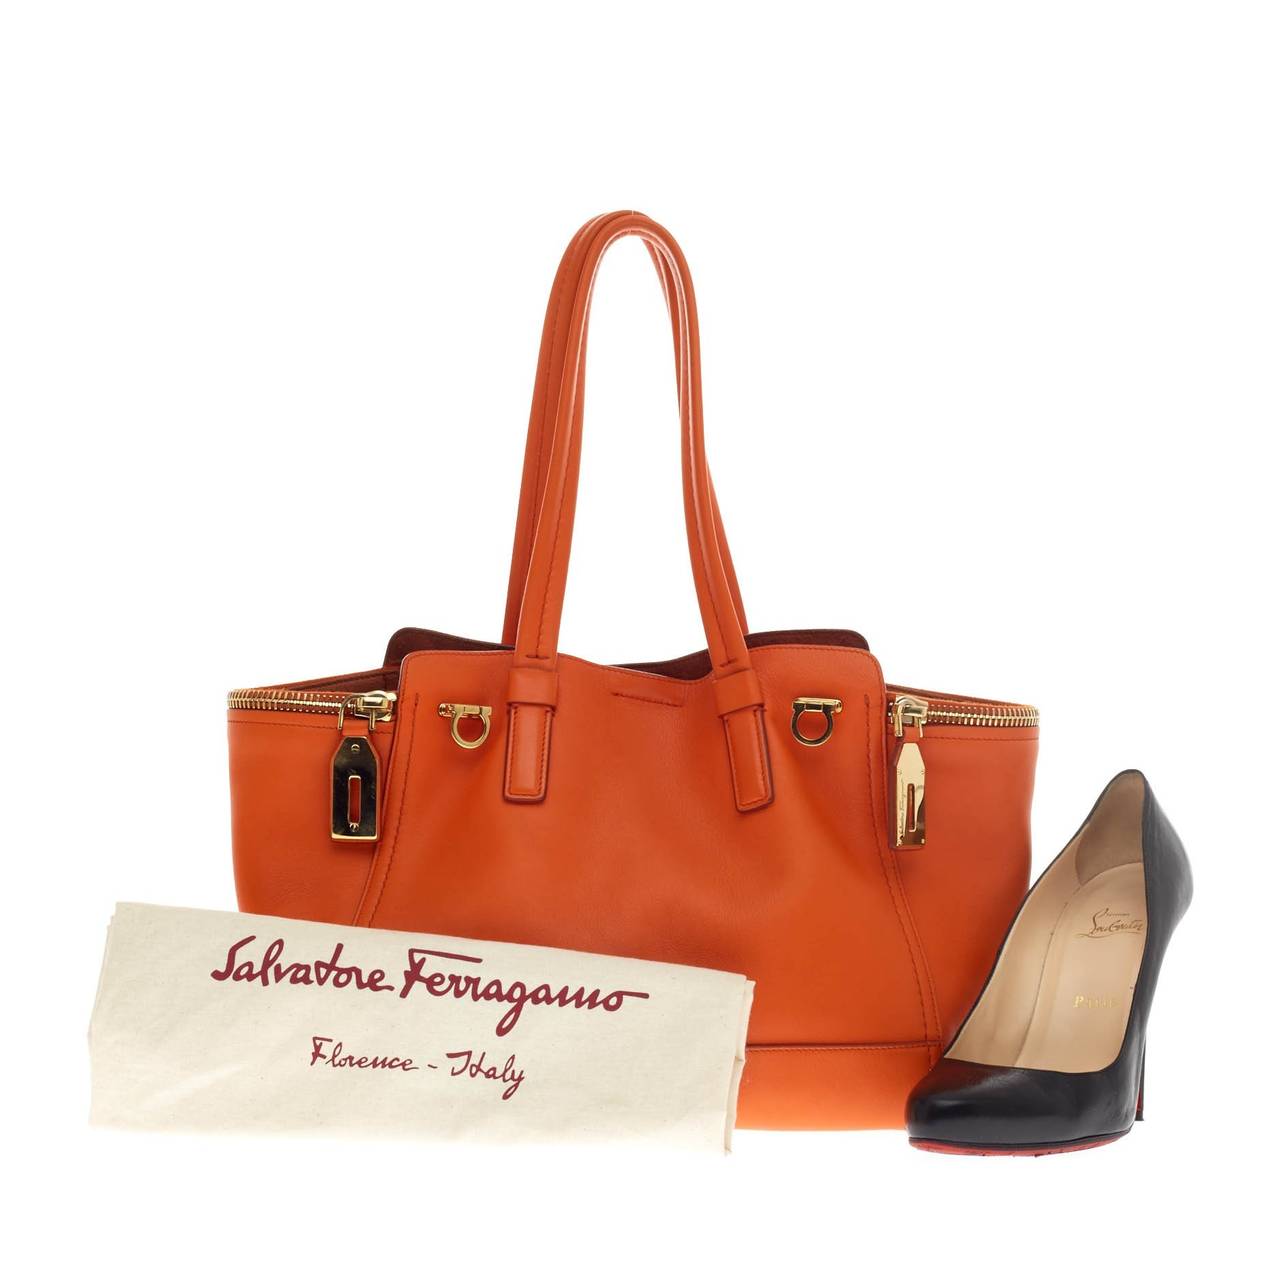 This authentic Salvatore Ferragamo Verve Tote Leather Medium is a vibrant and glamorous tote perfect for traveling in style or for a weekend getaway. Crafted in vibrant orange soft leather, this elegant bag features dual rolled handles, two side